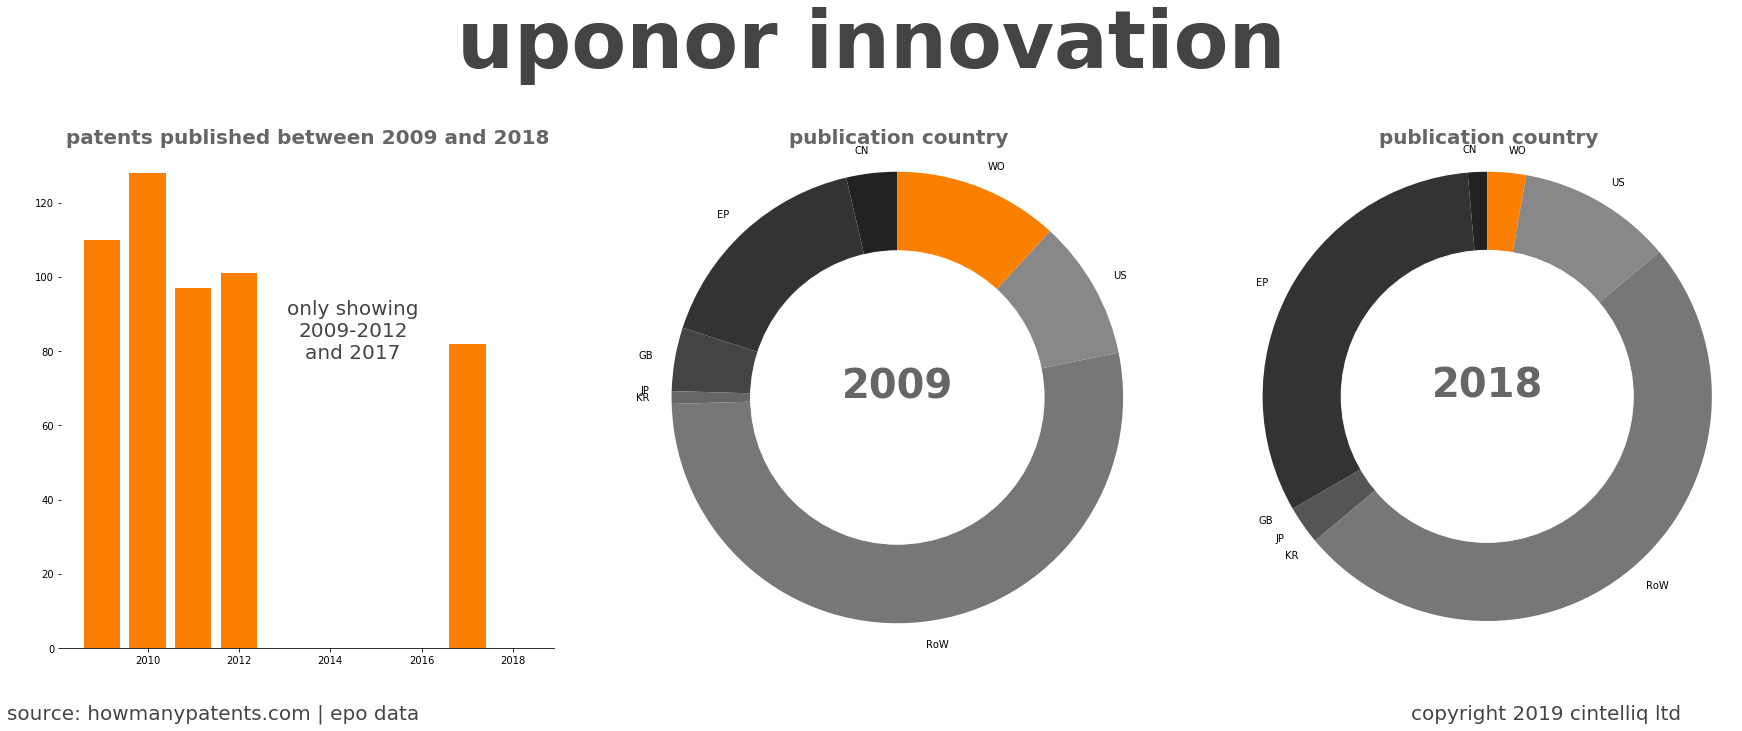 summary of patents for Uponor Innovation